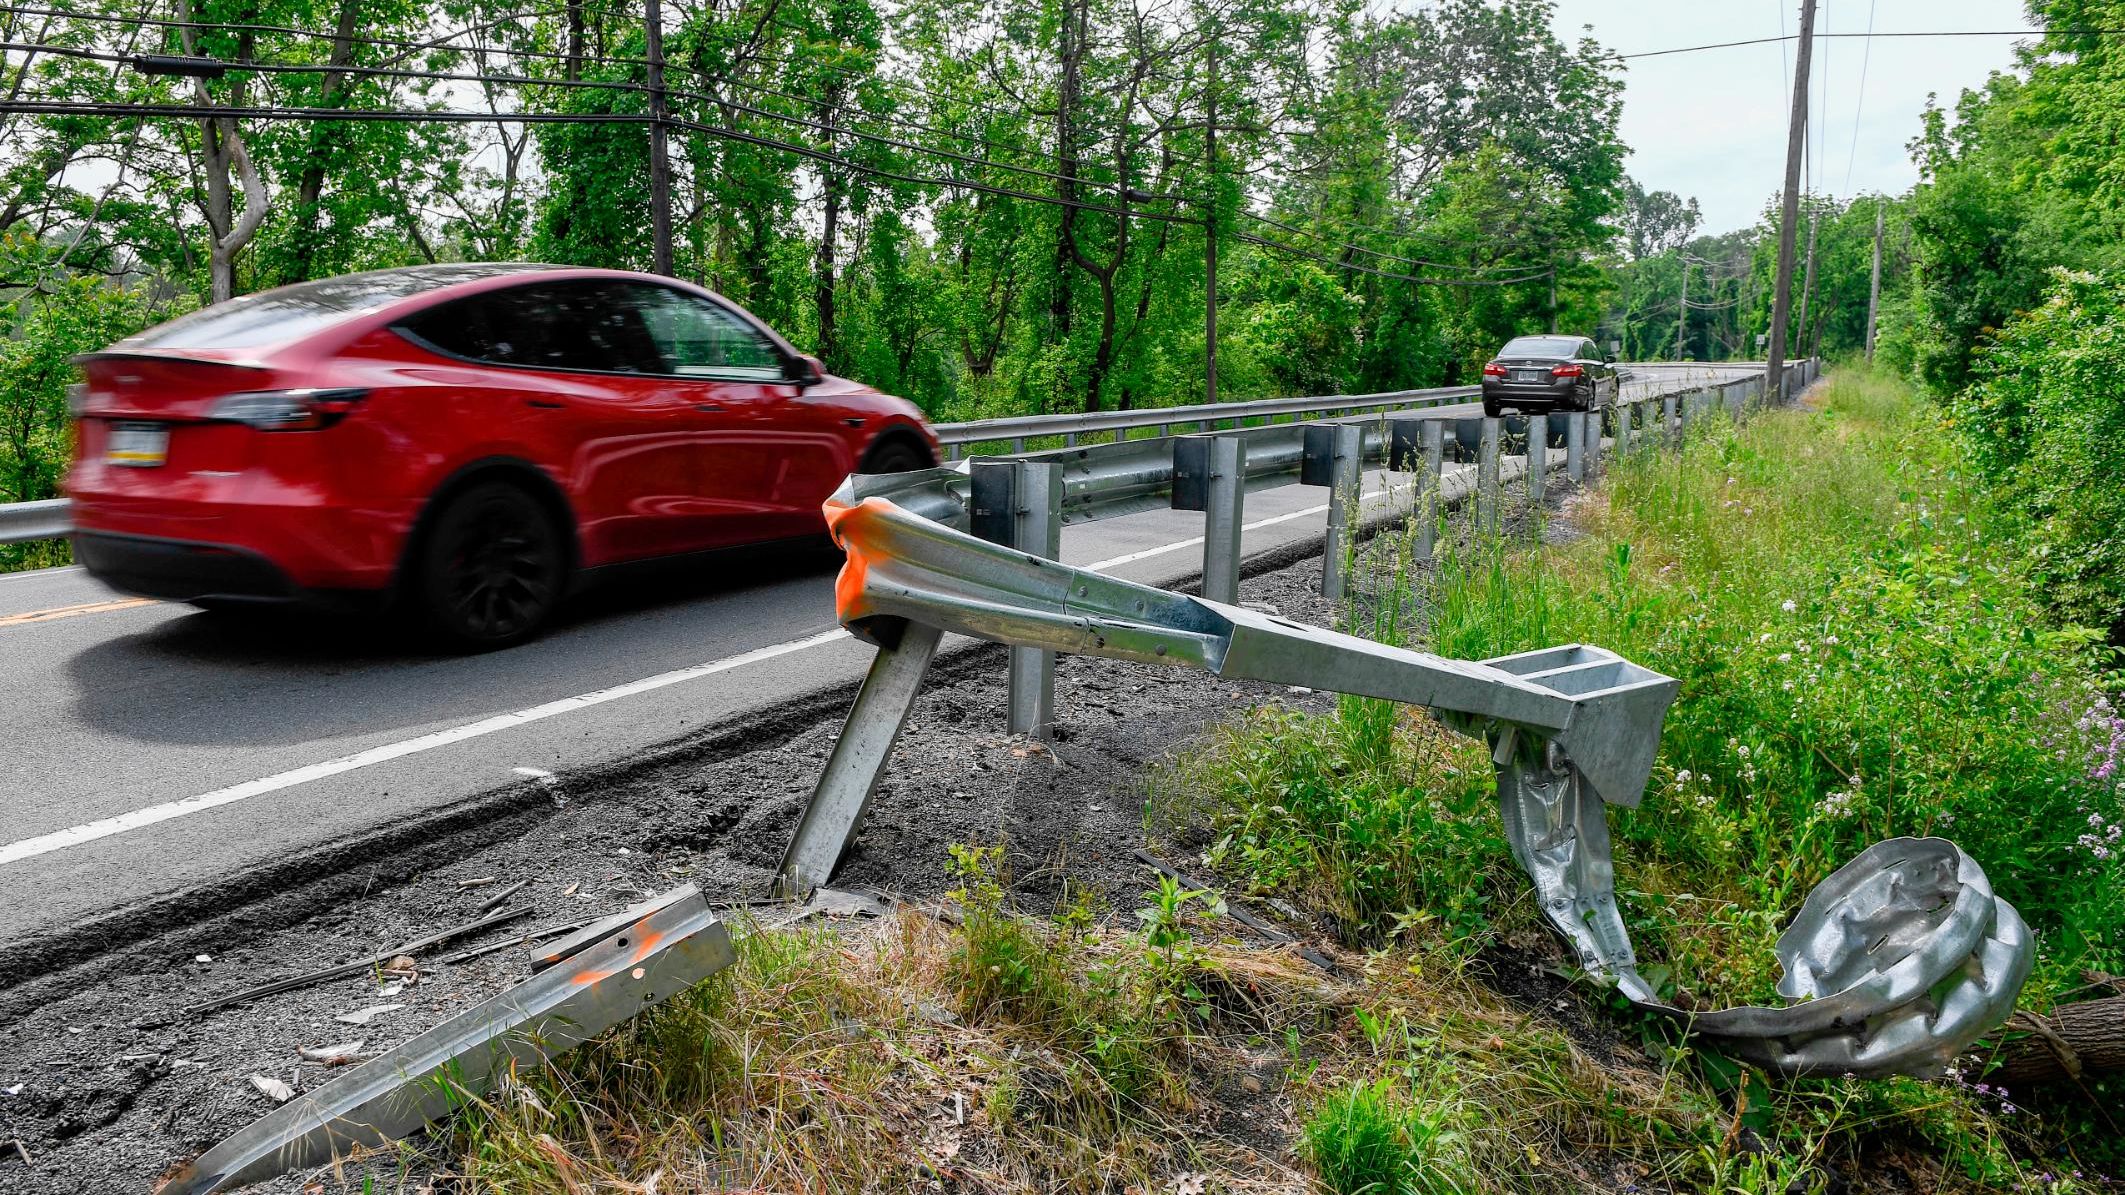 Many states reported an increase in fatal crashes in 2020 compared to previous years.